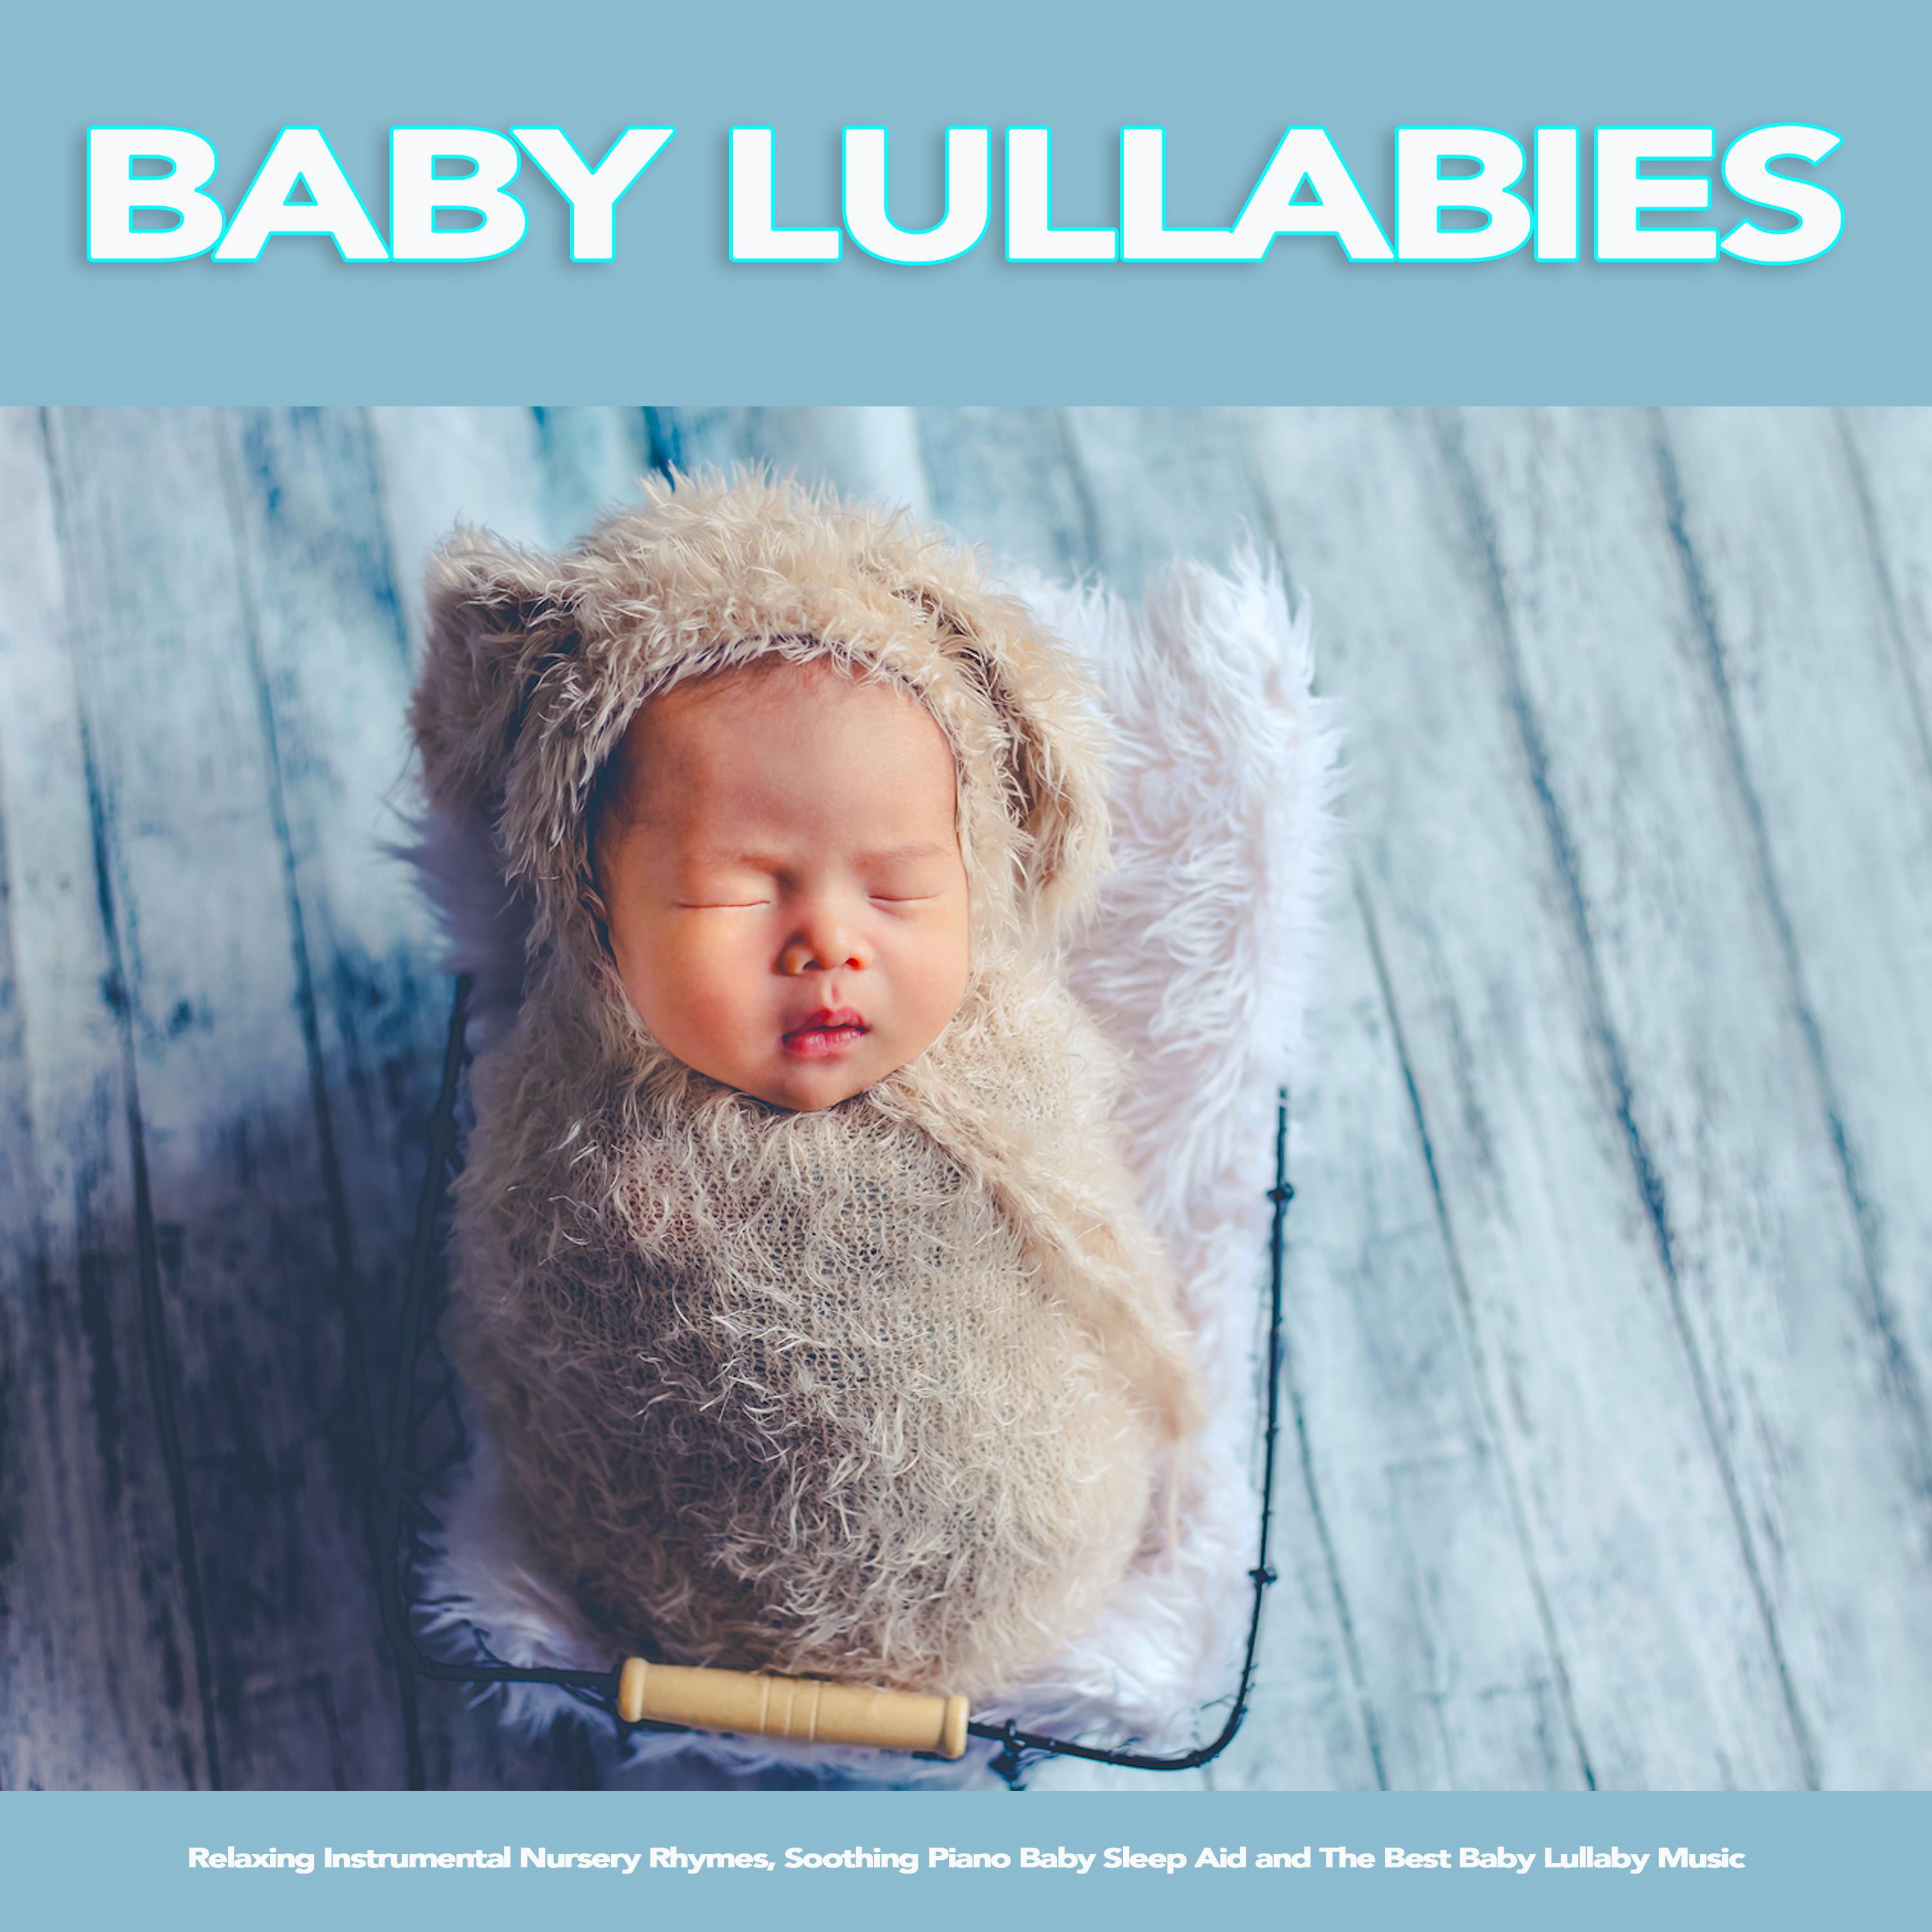 The Wheels On The Bus - Baby Lullabies and Nursery Rhymes For Baby Sleep